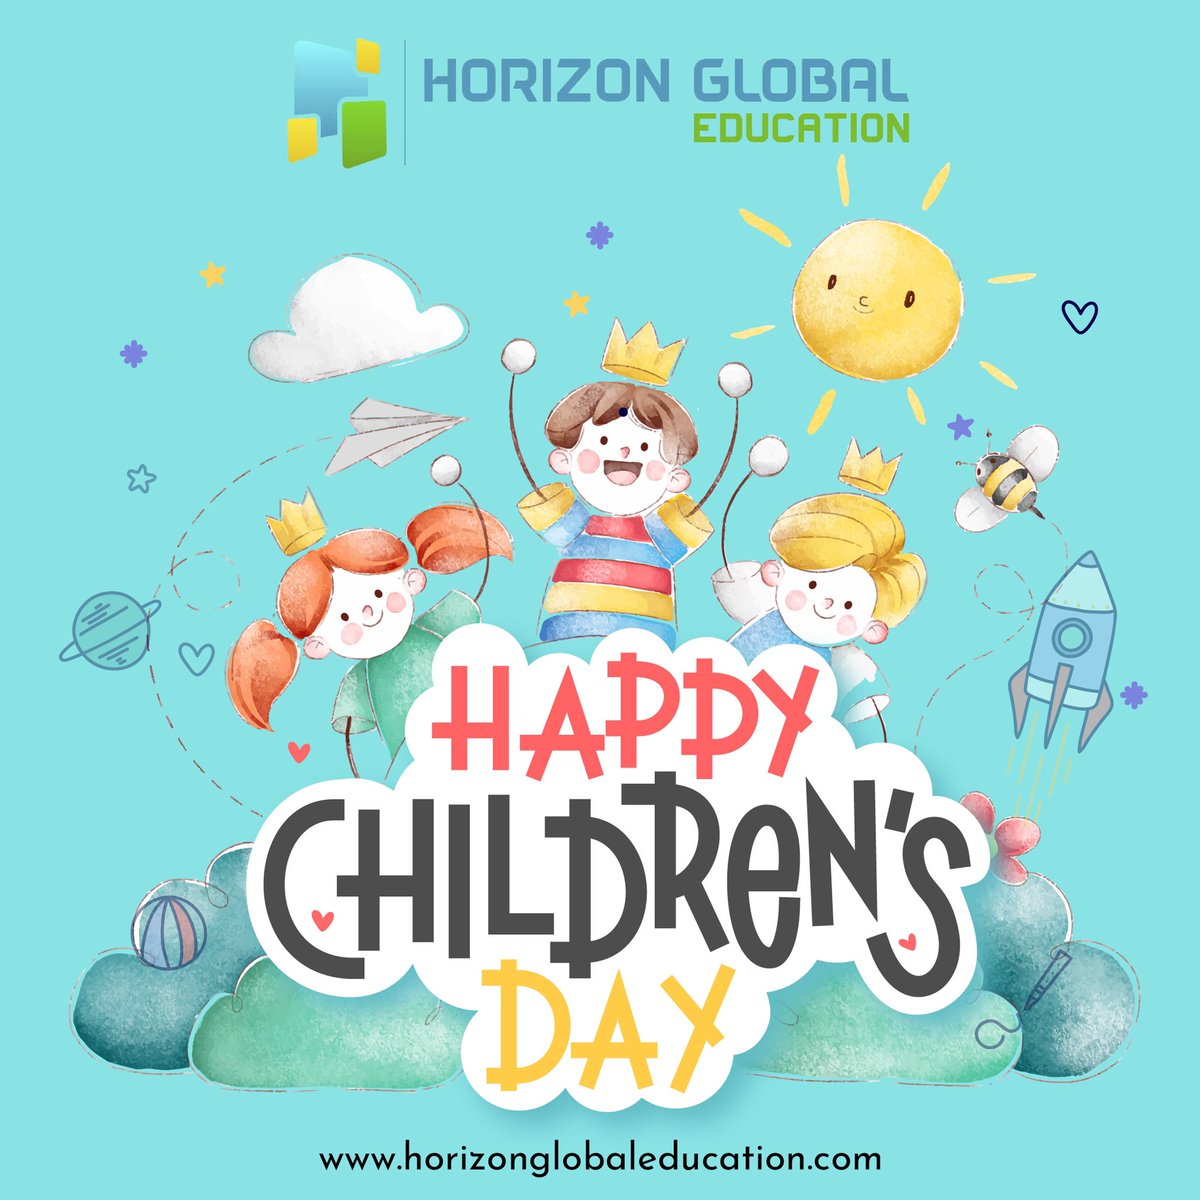 Let's celebrate the day of innocence and joy. Happy Children's Day!

call: +91 98401 73327
Visit: horizonglobaleducation.com

#usacpa #childrensday #newpost  #international #uscmachennai #cmainstitute #horizonglobaleducation #CPAreview  #accounting 
#cma #cmausa #cmastudents